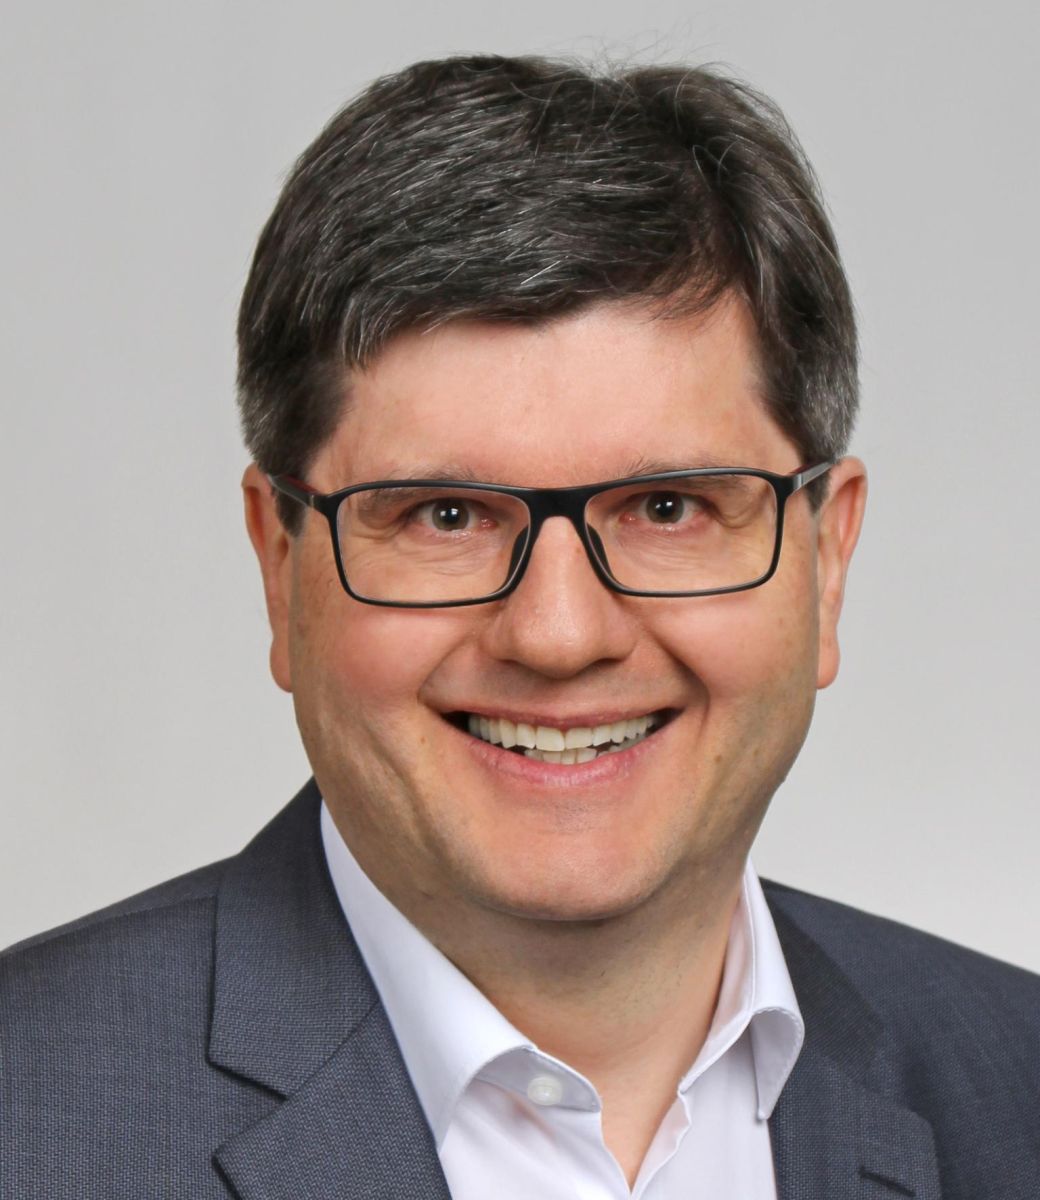 Mag. Franz Edlbauer, MBA